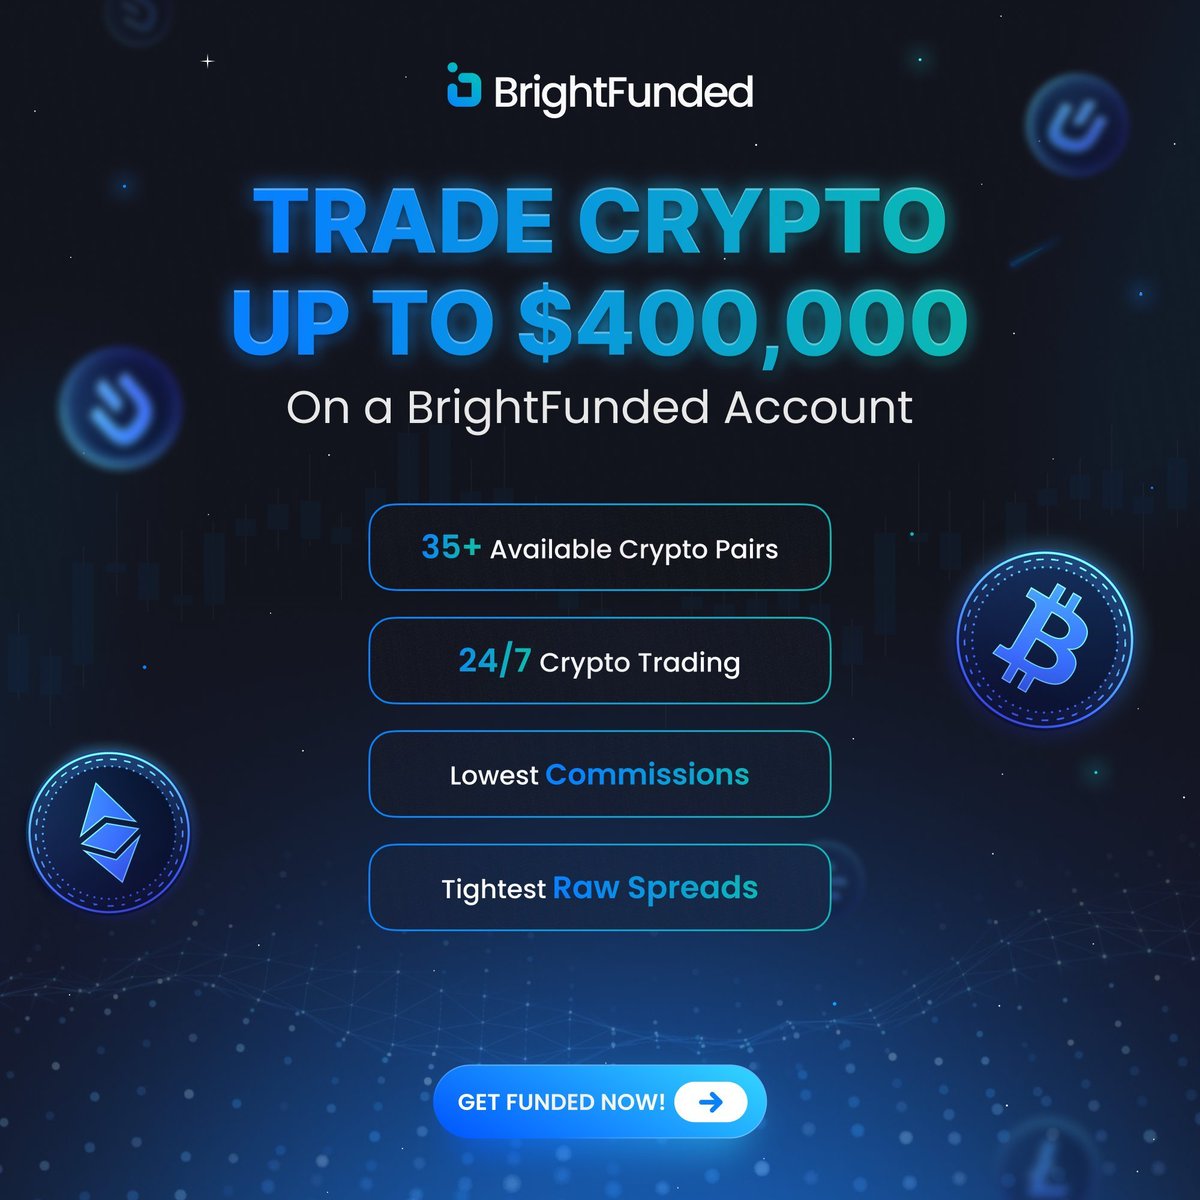 If you spot some great Crypto setups today, remember BrightFunded is your go-to place for all your Crypto Prop Trading needs! 💎 ✅ 35+ Available Crypto Pairs ✅ 24/7 Trading ✅ Lowest Commissions & Spreads